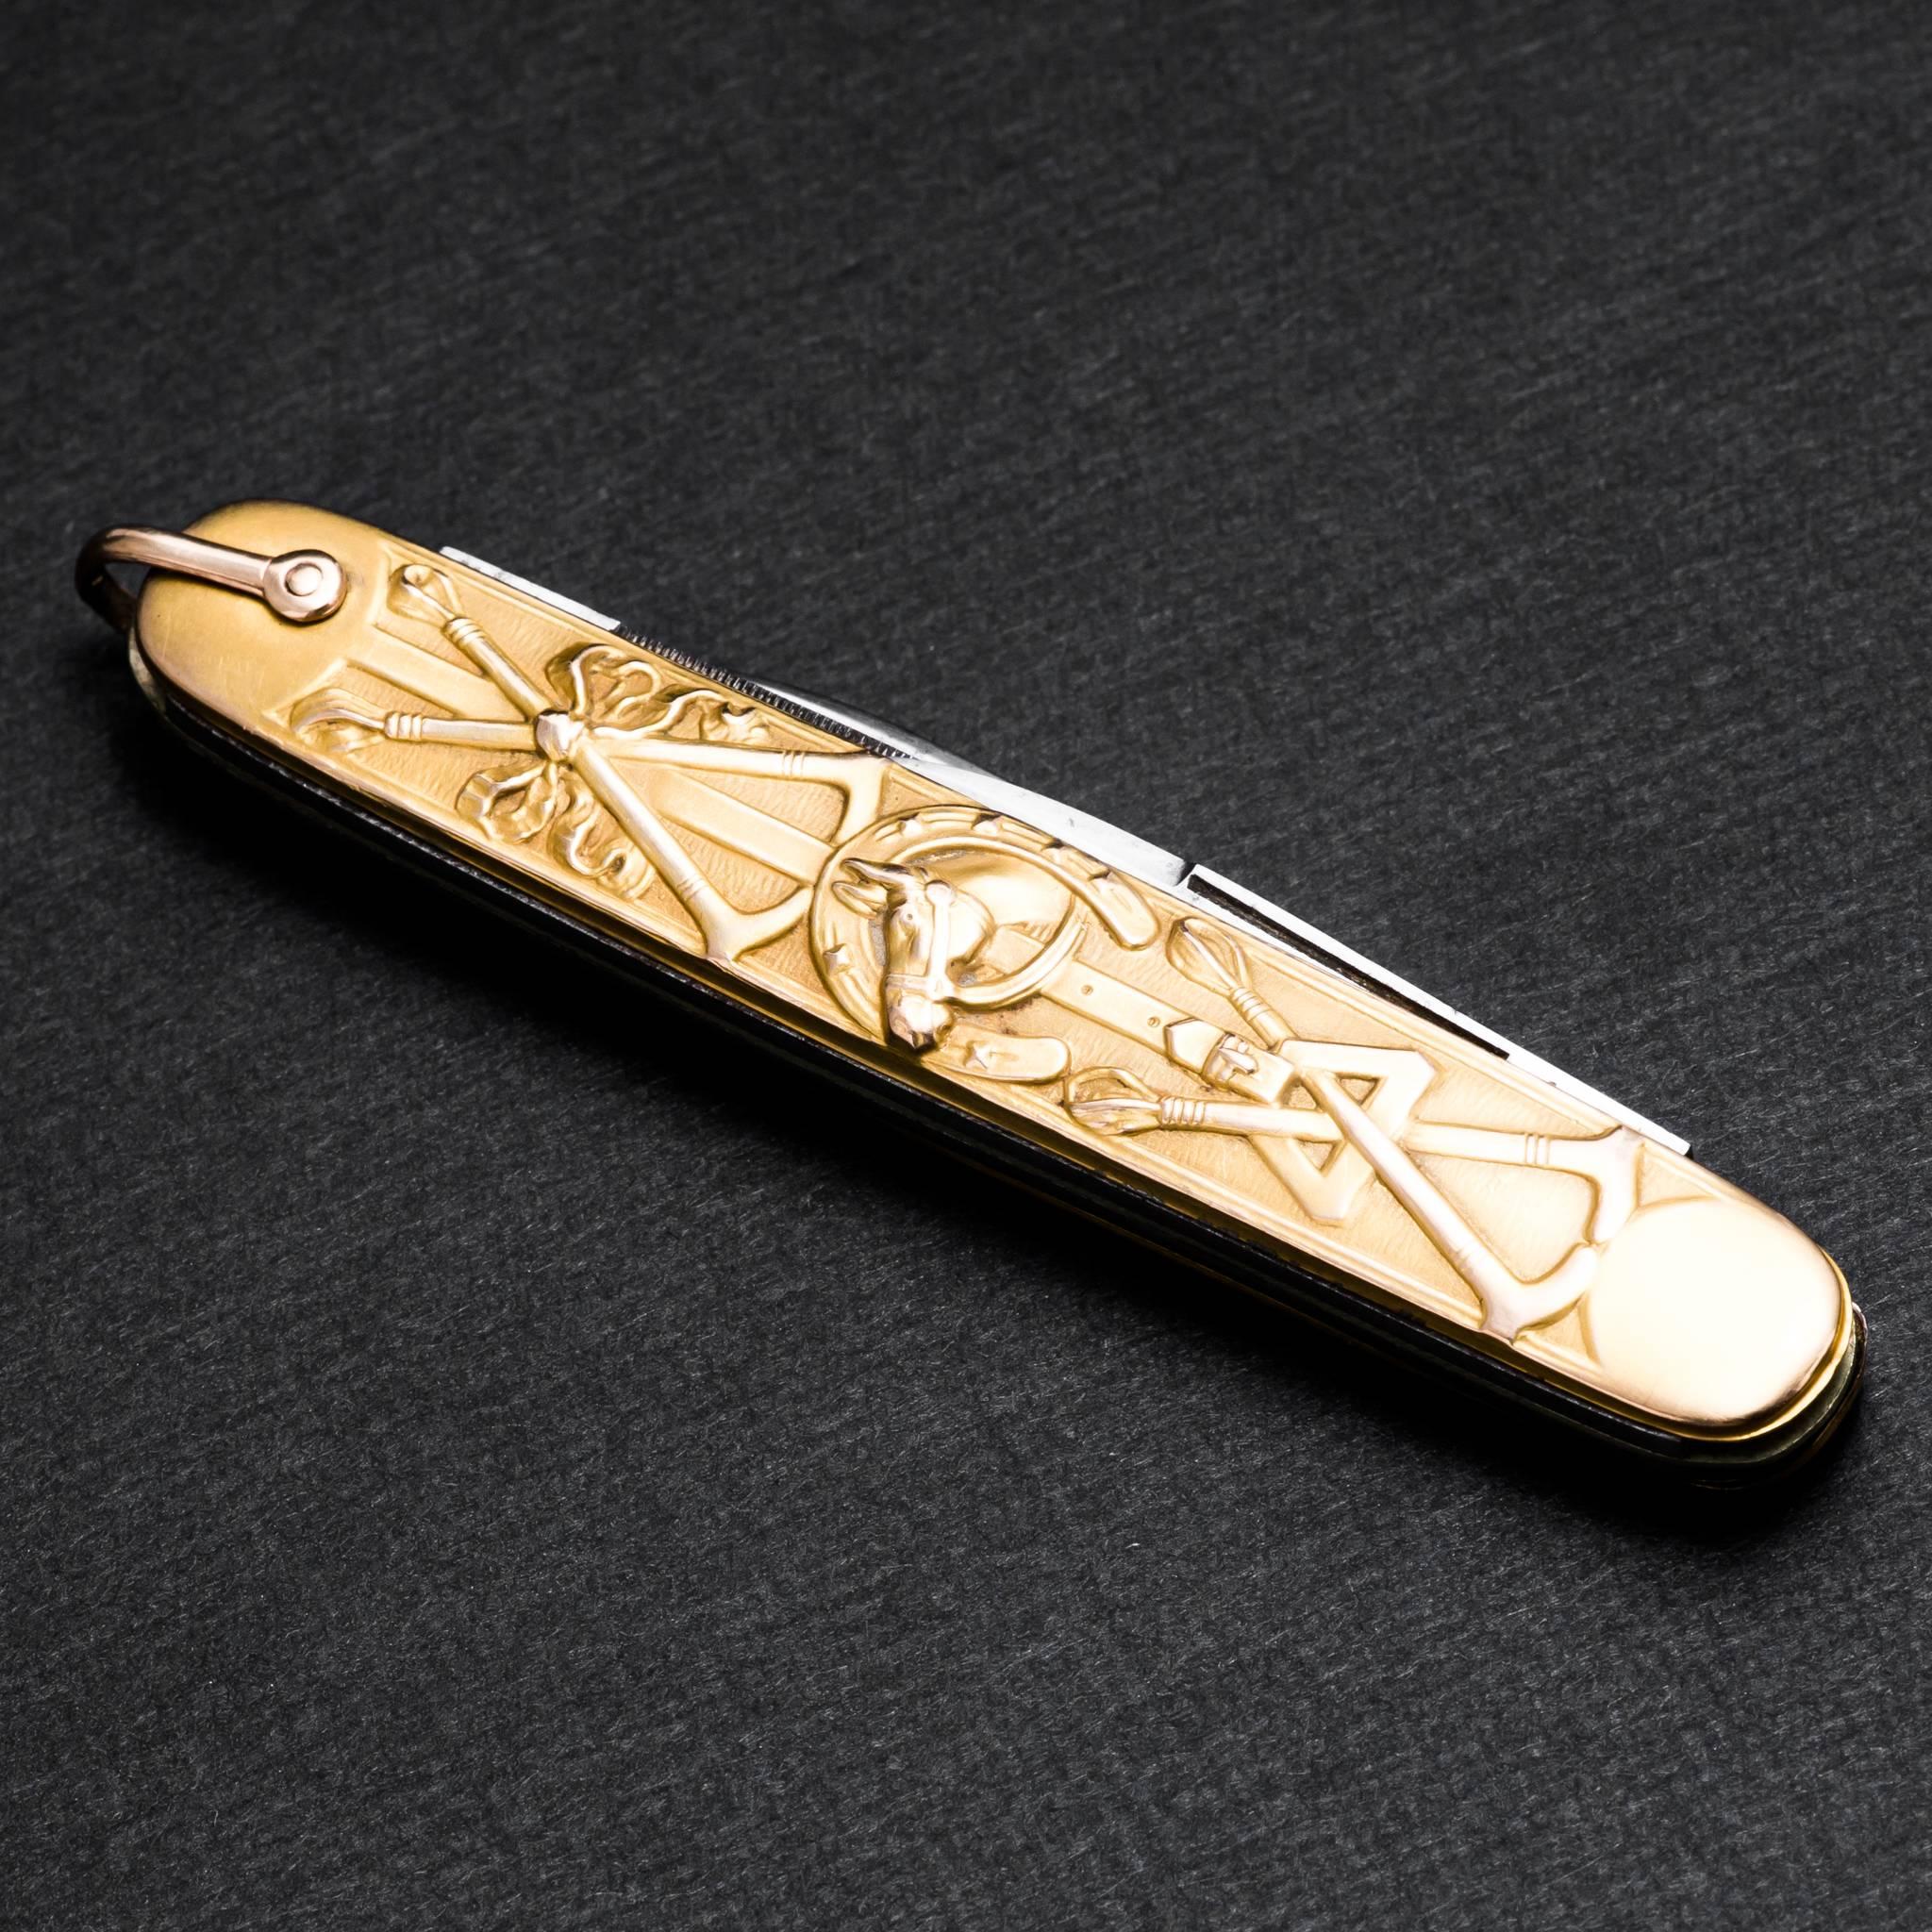 Beacon Hill Jewelers Presents:

An exquisite mens 14 karat yellow gold and diamond pocket knife featuring horses, and horse shoes. Featuring embossed horse heads on both sides framed by horse shoes and polo clubs, this pocket knife is truly a